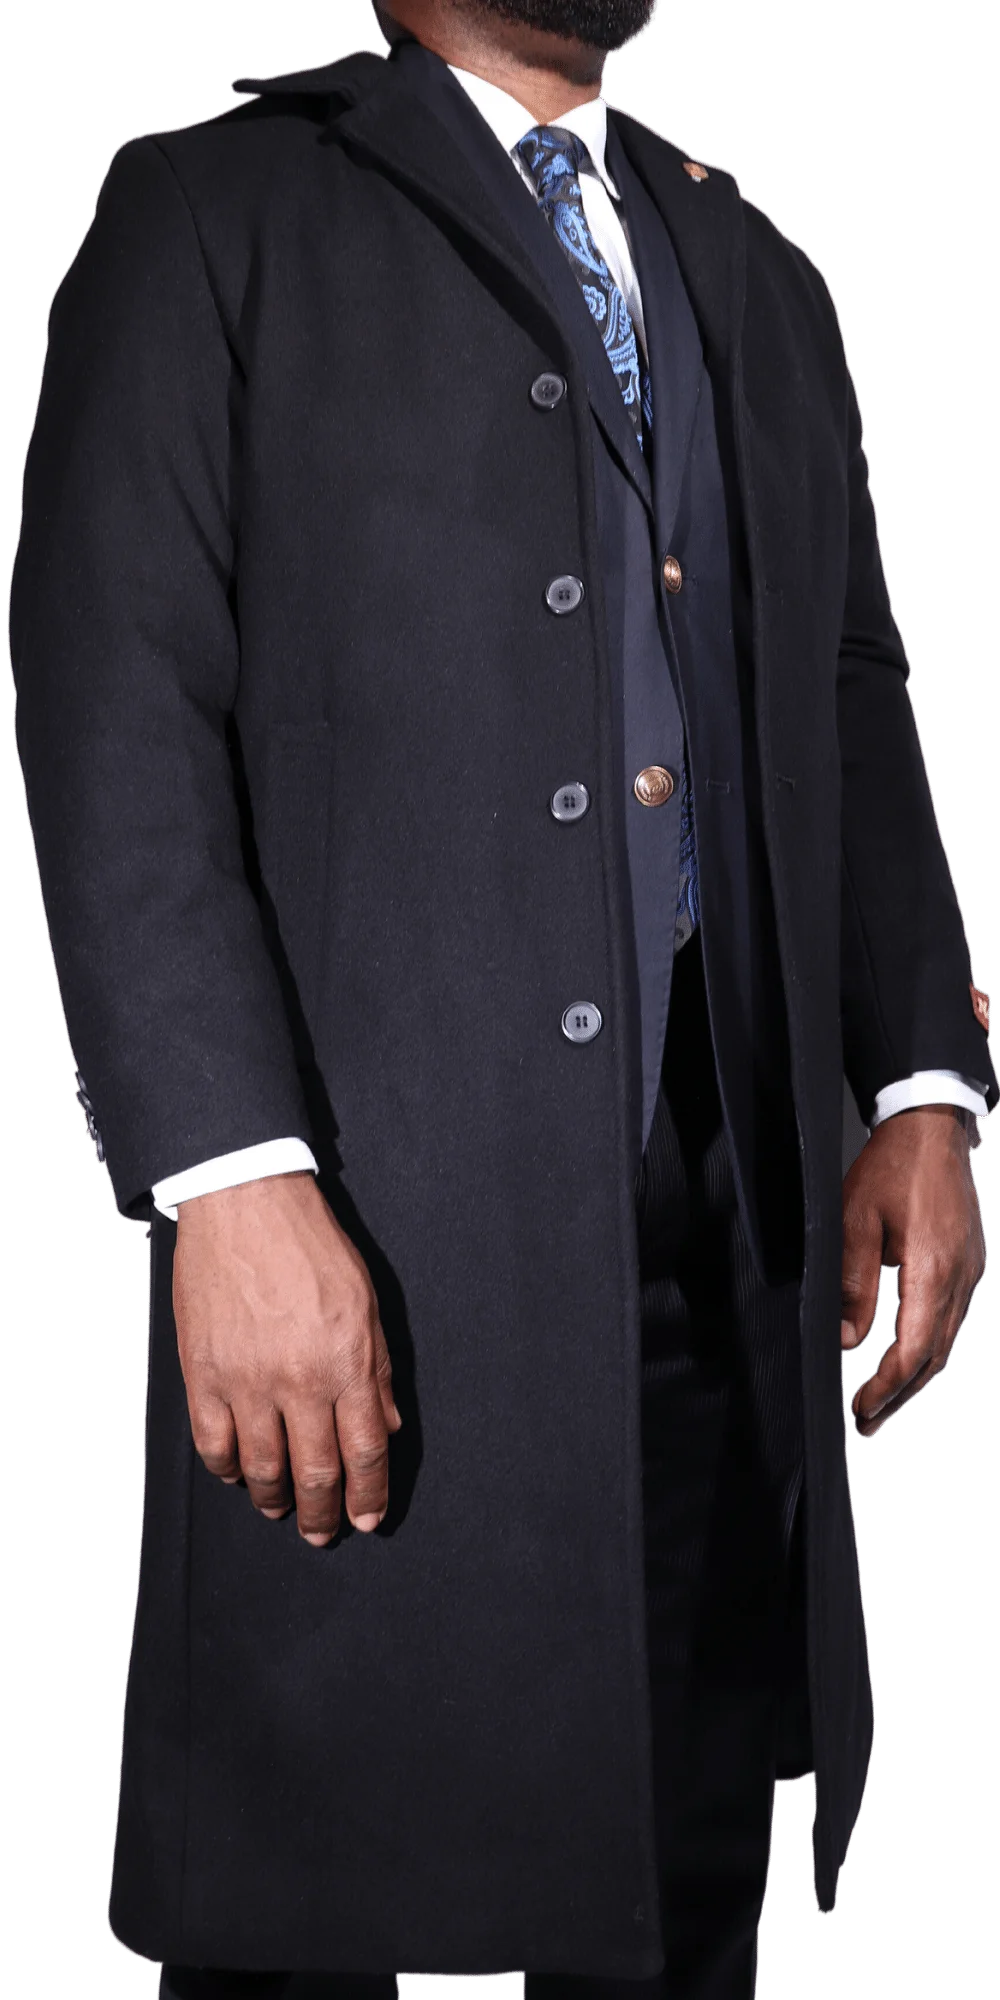 Men's Navada Clothing Cashmere Trenchcoat / overcoat in Black (111) available in-store, 337 Monty Naicker Street, Durban CBD or online at Omar's Tailors & Outfitters online store.   A men's fashion curation for South African men - established in 1911.